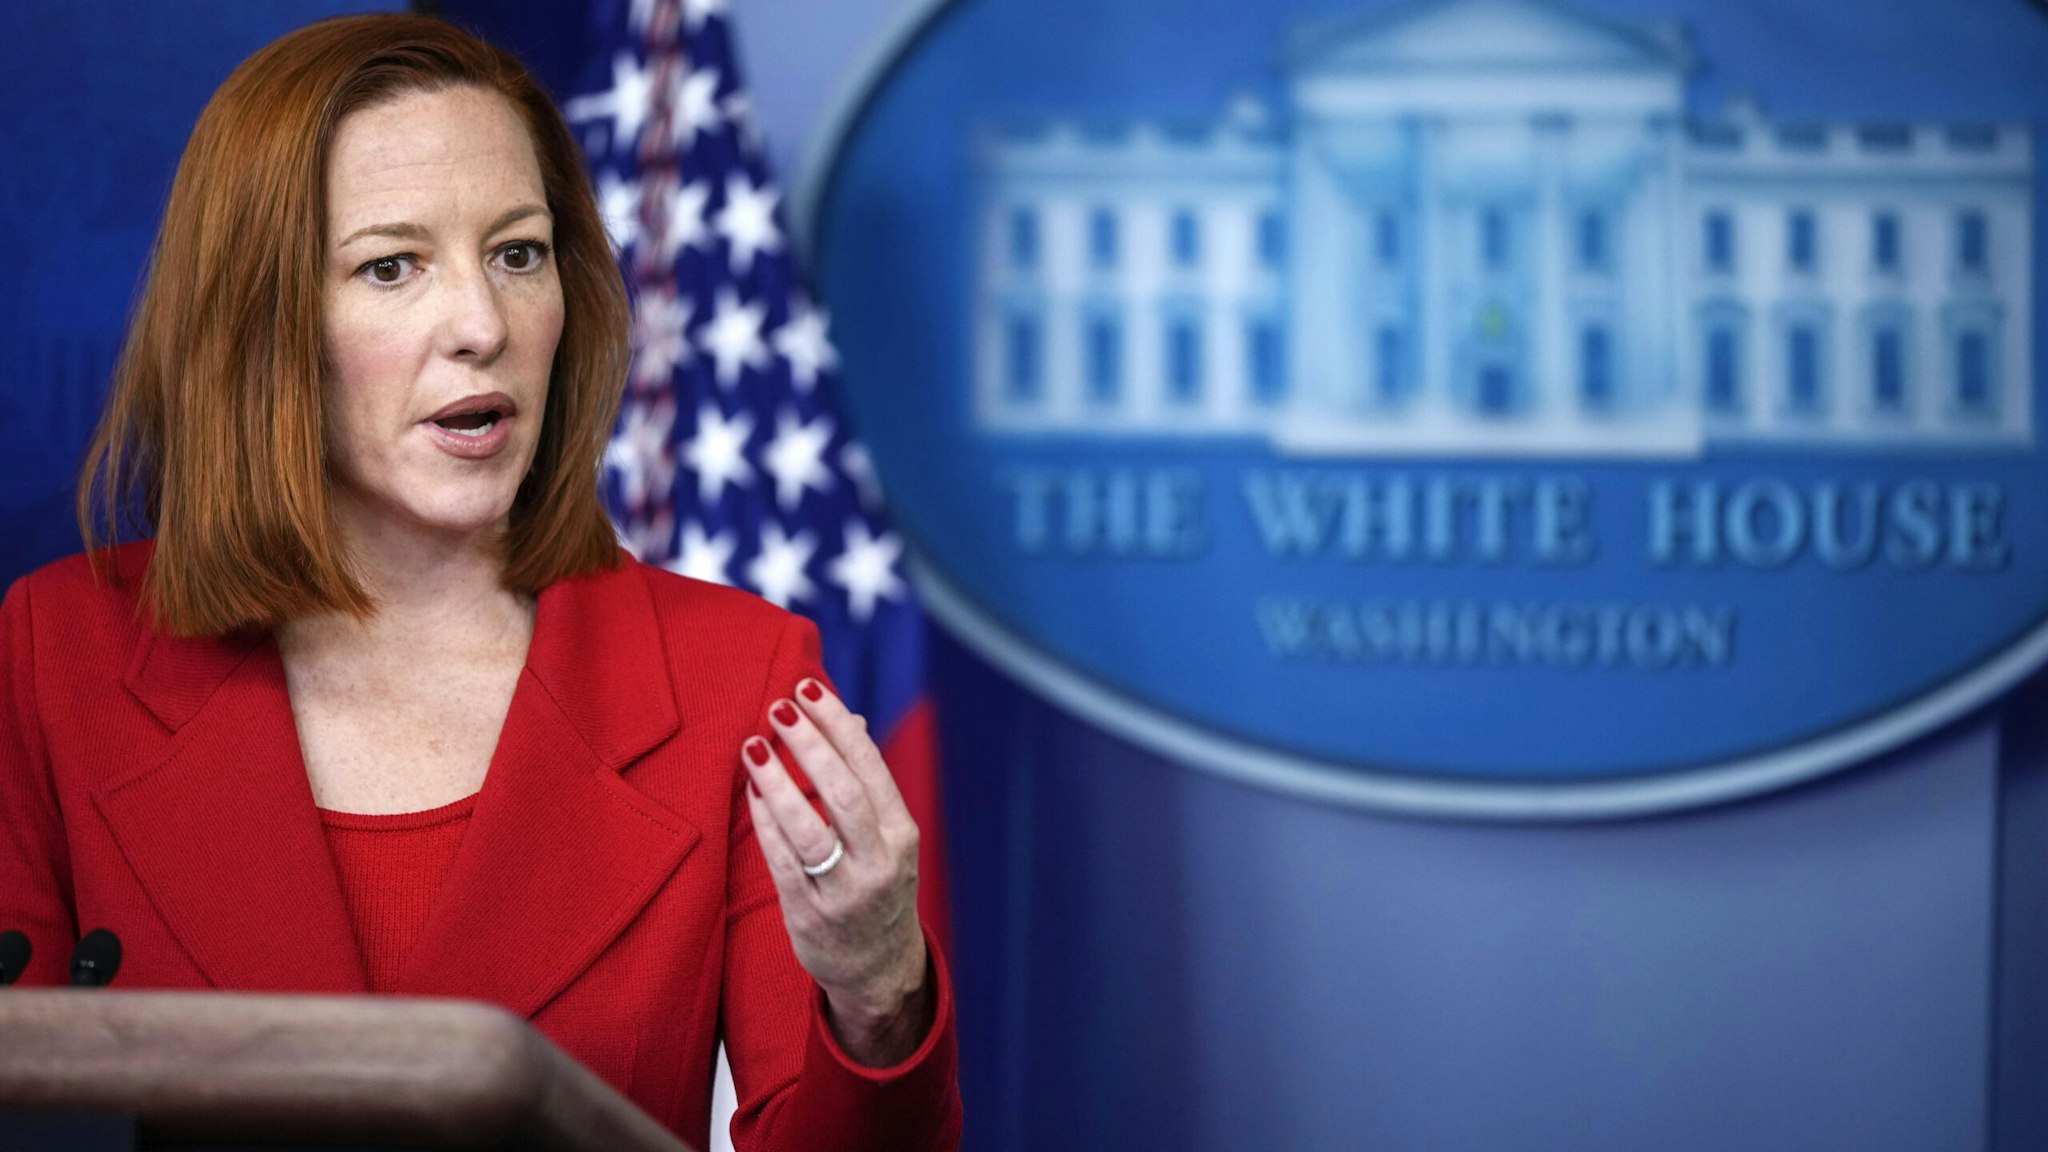 WASHINGTON, DC - MARCH 2: White House Press Secretary Jen Psaki speaks during the daily press briefing at the White House on March 2, 2021 in Washington, DC. Later on Tuesday, President Joe Biden will deliver remarks on the ongoing COVID-19 pandemic.